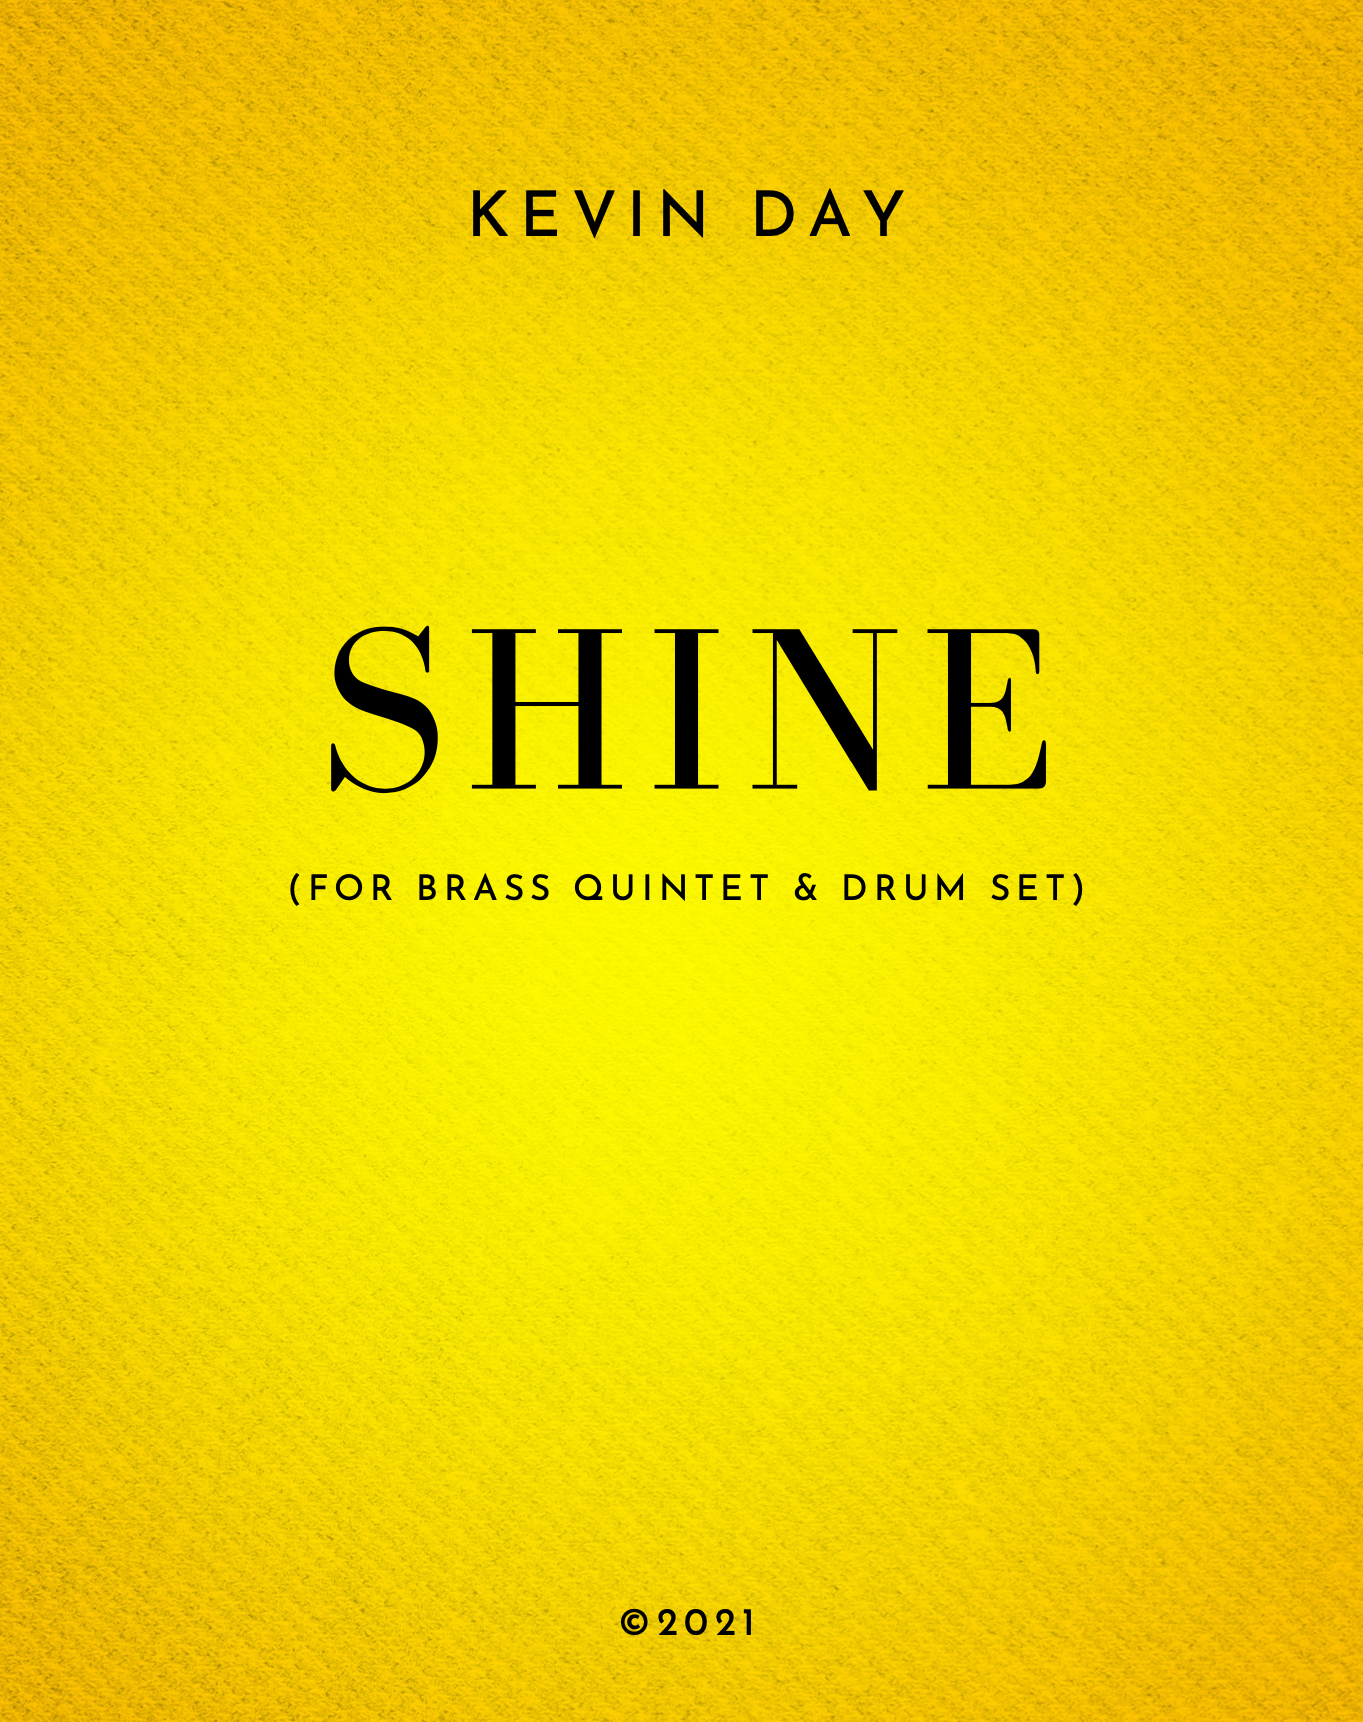 Shine by Kevin Day